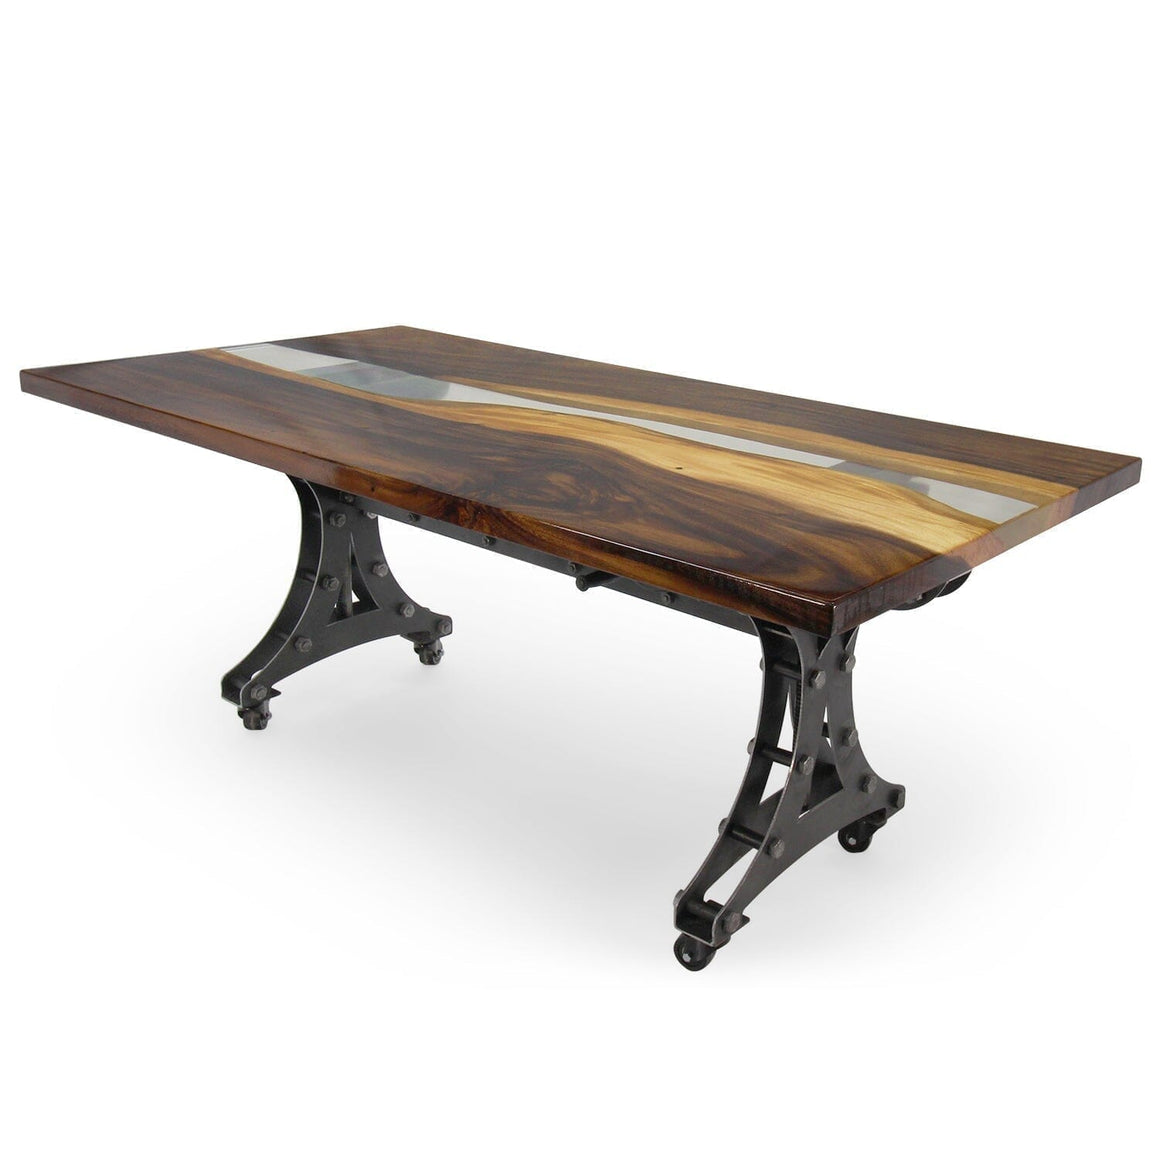 Walnut Live Edge Slab Dining Tabletop - Clear River Resin - 80 x 40 x 2" - Rustic Deco Incorporated